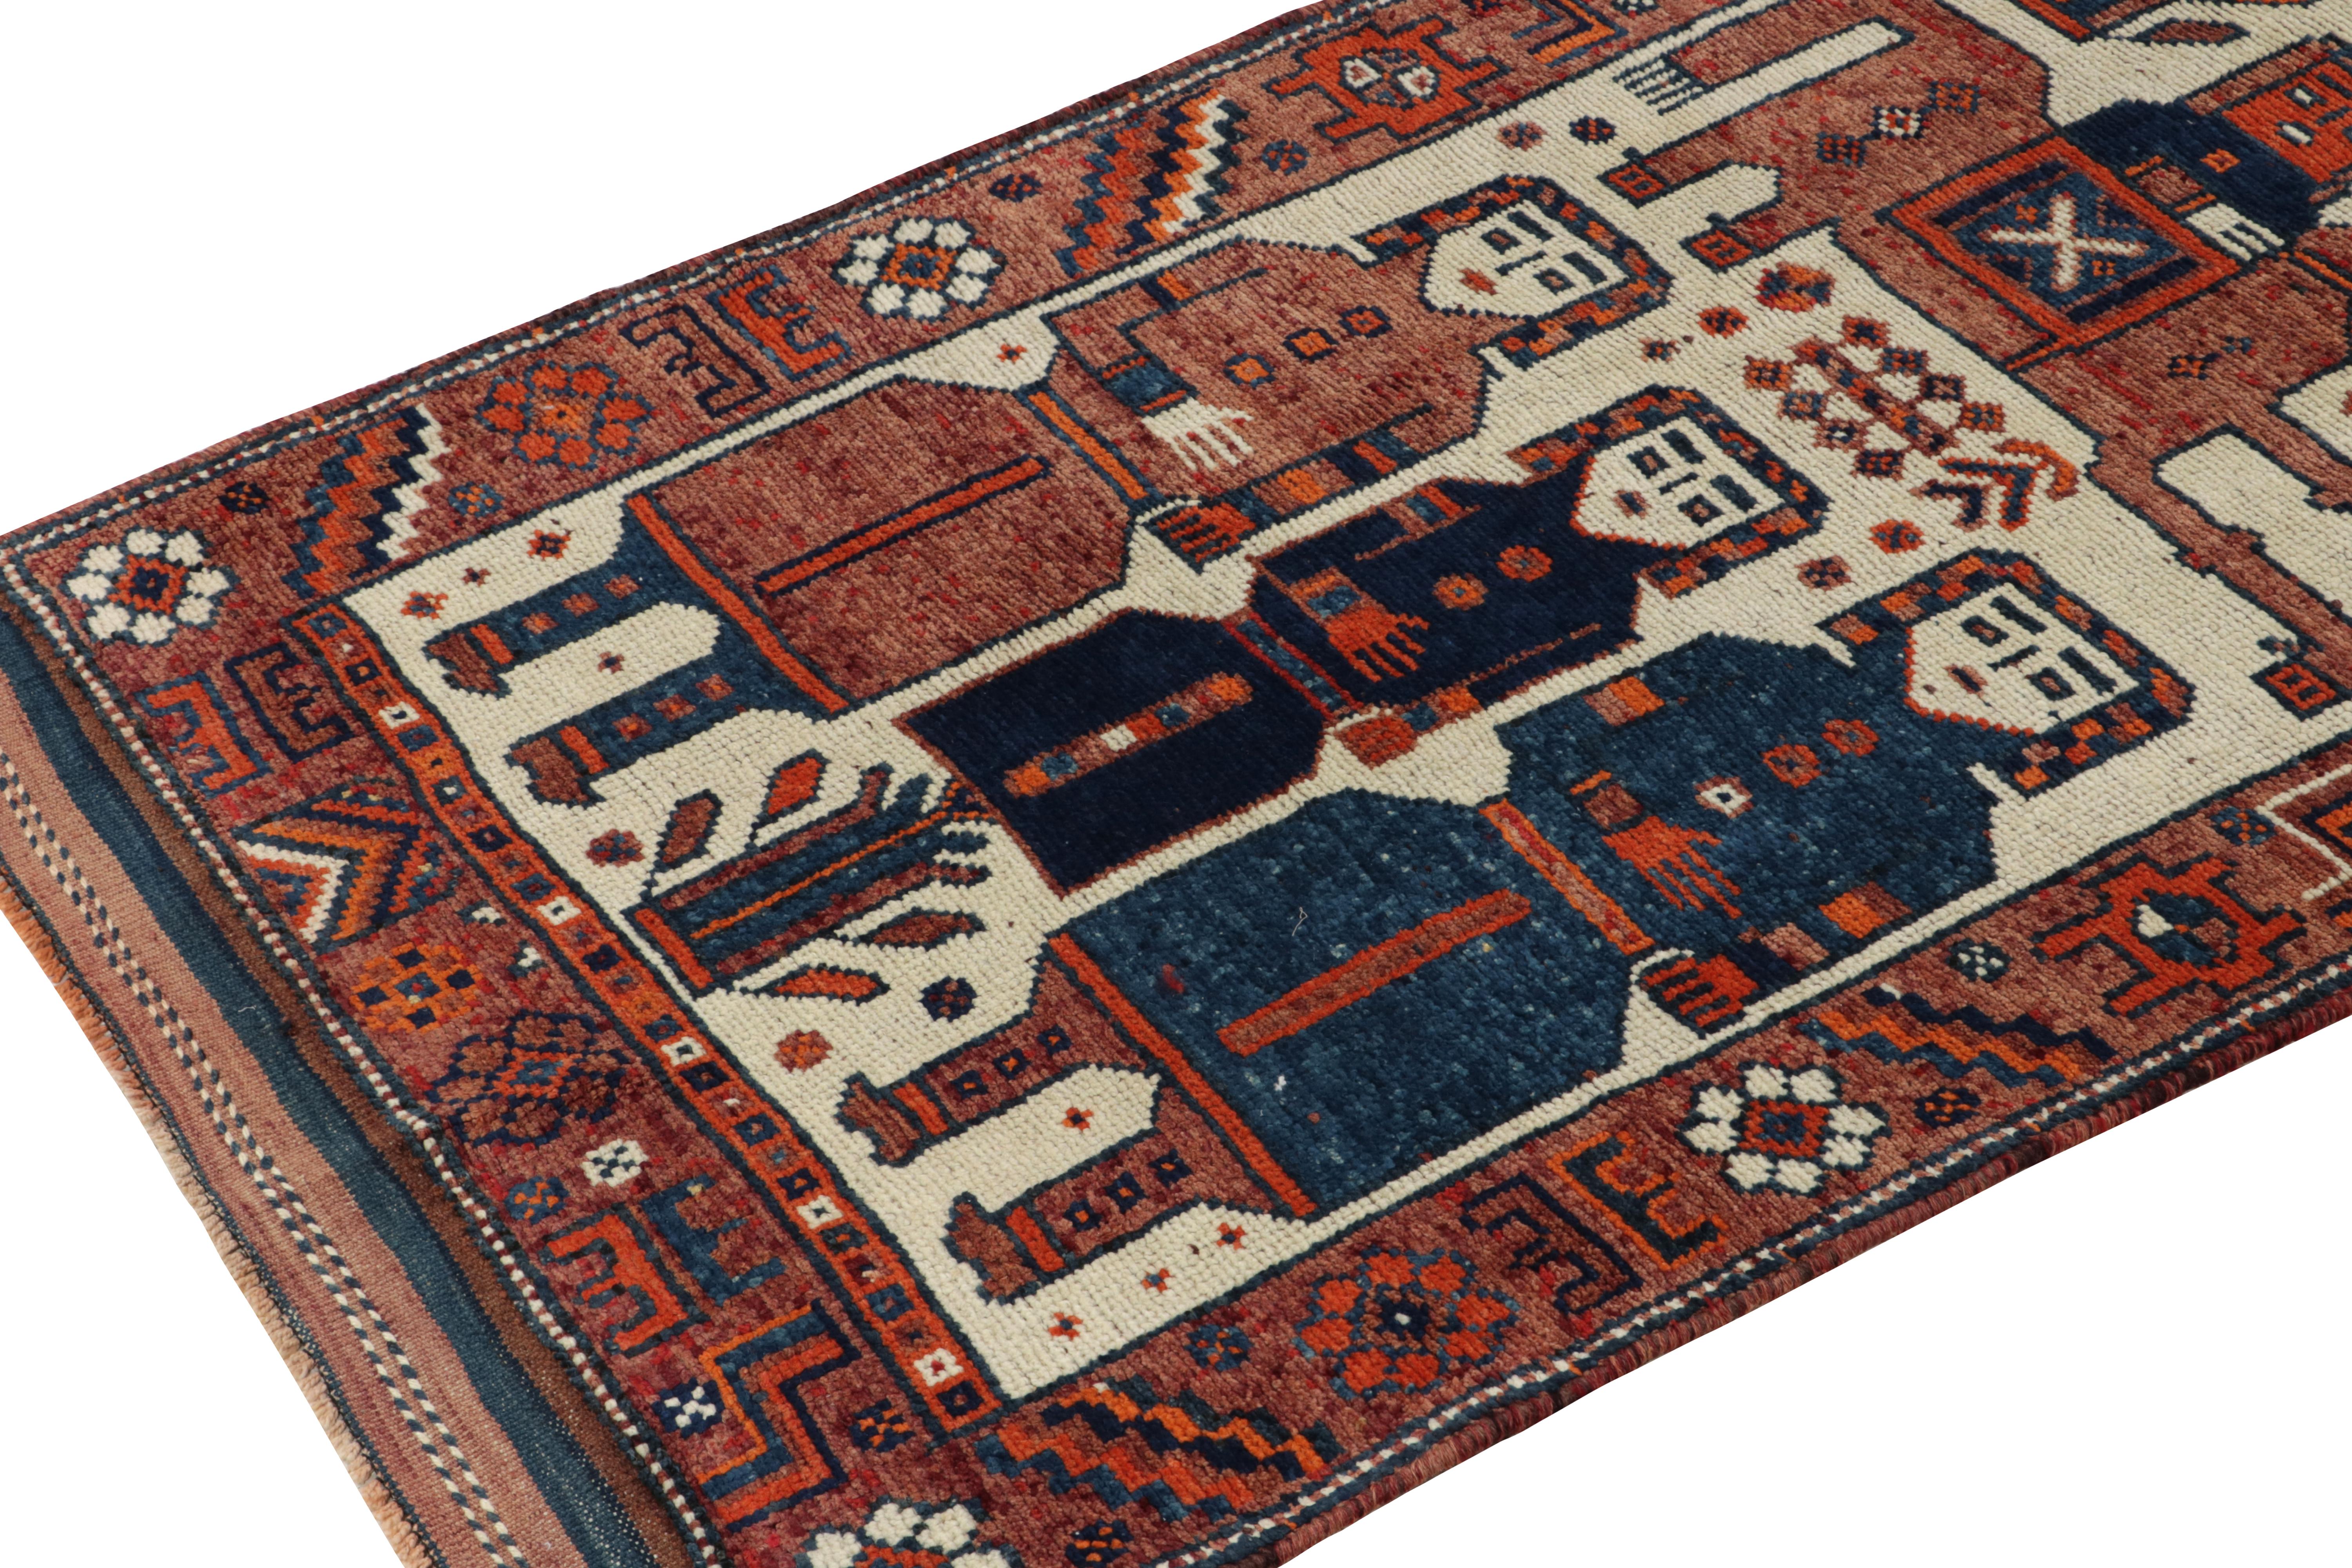 Hand-Knotted 1950s Vintage Tribal Rug in, Blue and Orange Pictorial Motifs by Rug & Kilim For Sale